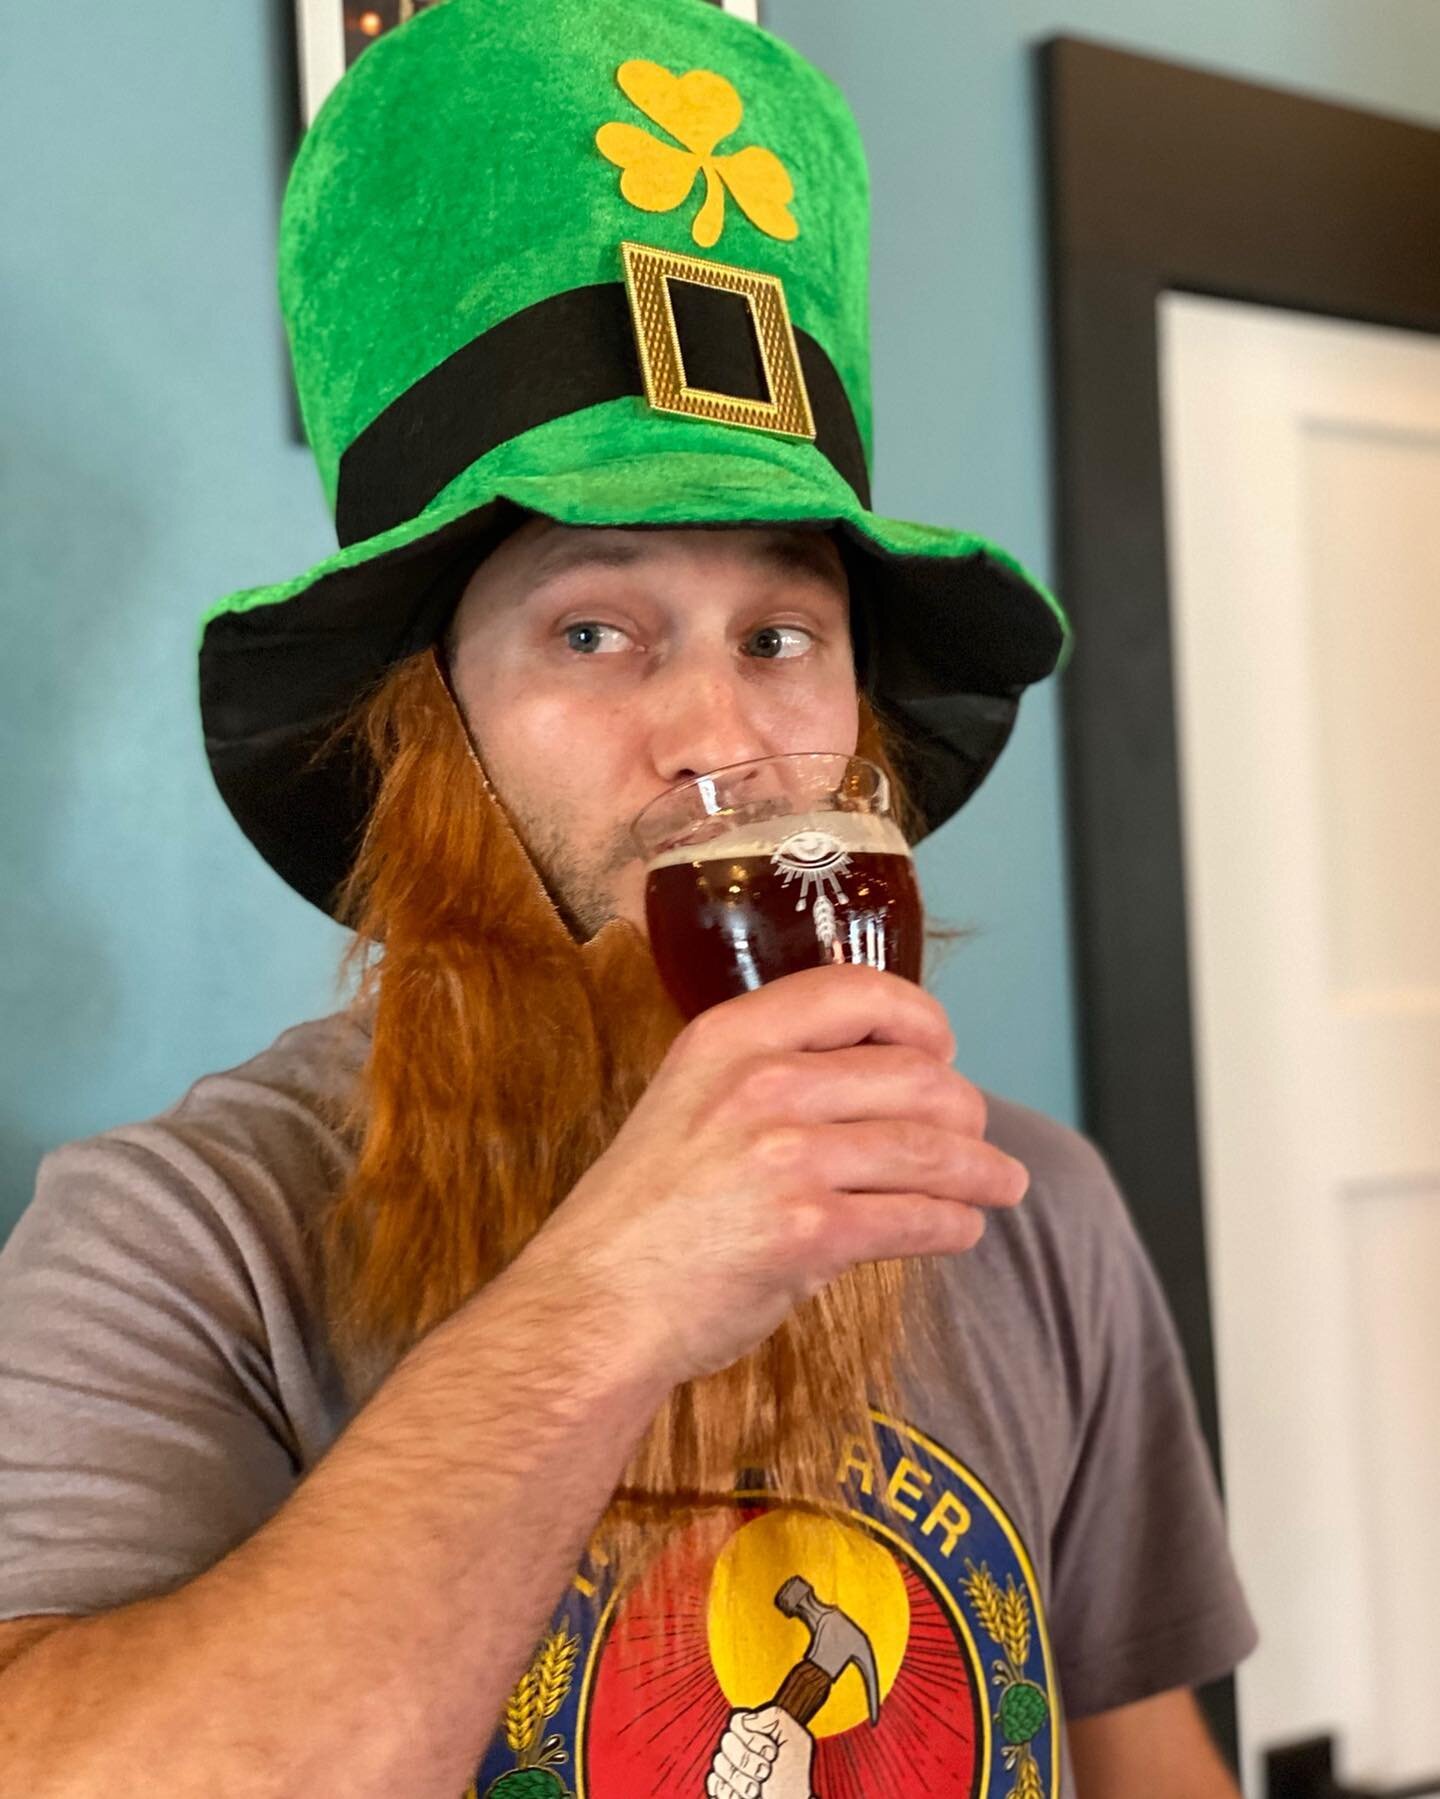 Feeling lucky around here. 🍀 Try our Irish Red, Red Rabbits, tonight!